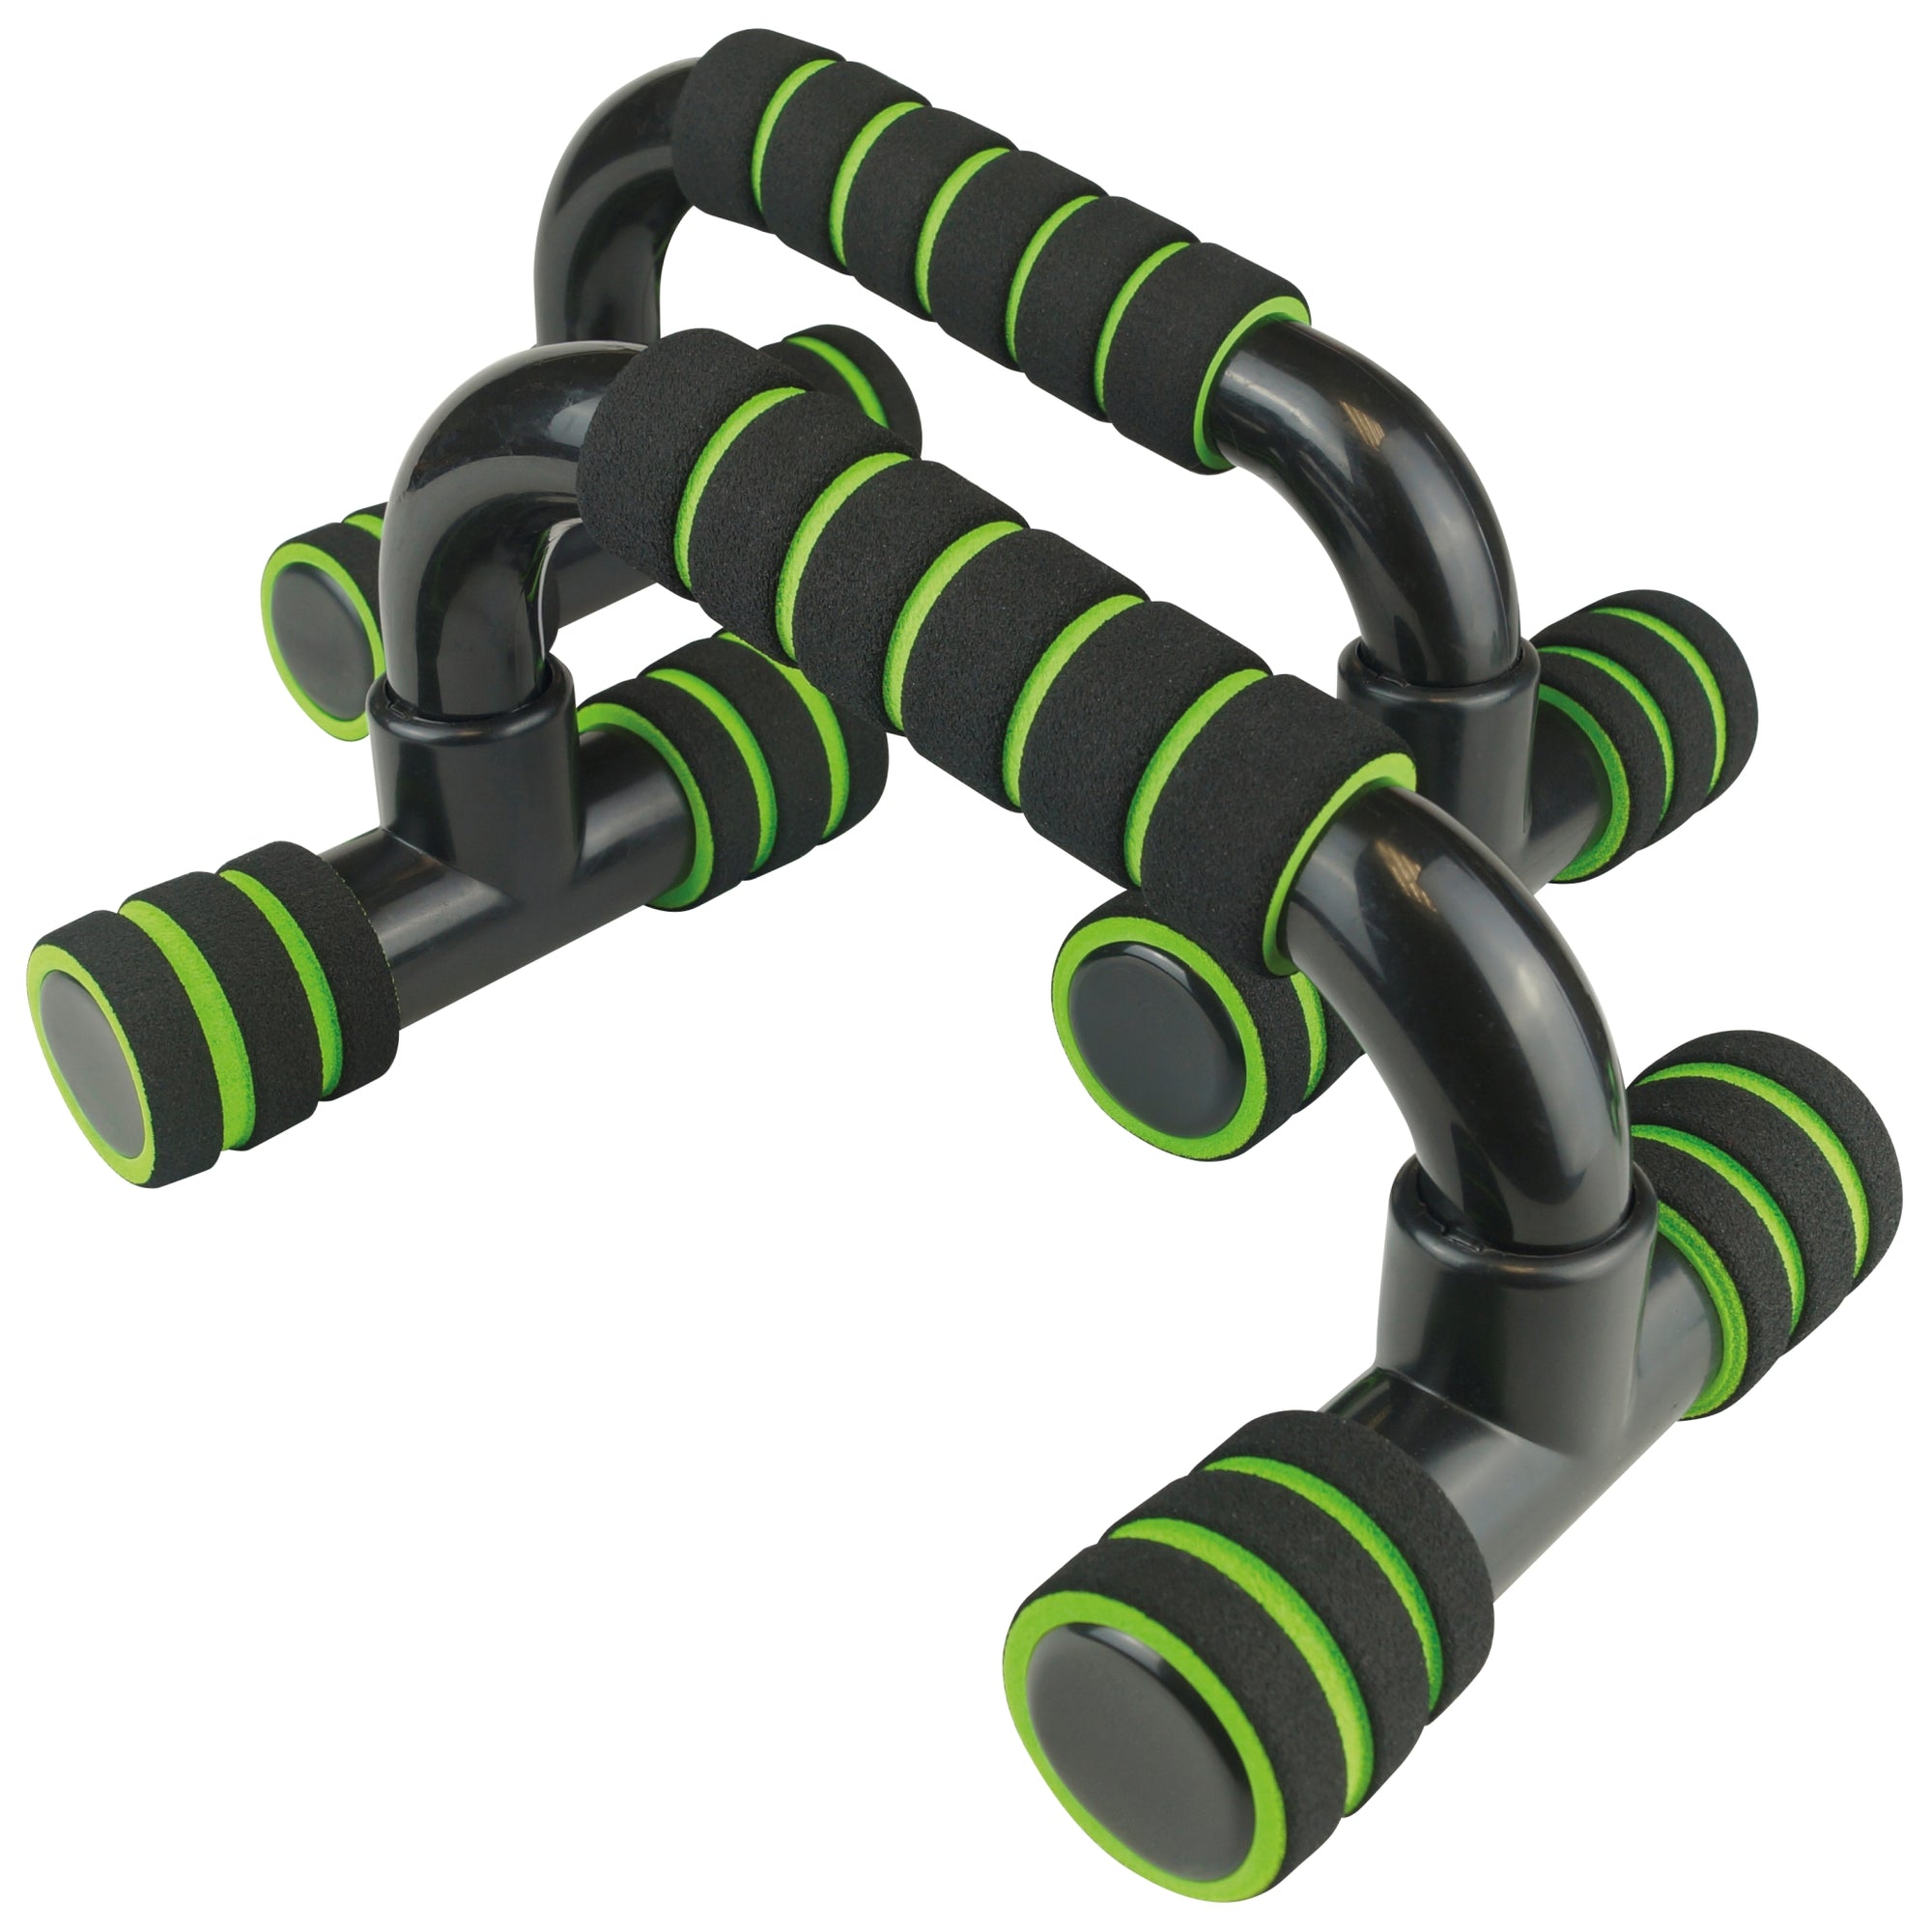 2 UFE Push Up Bars in black with green ring detailing on the foam grip